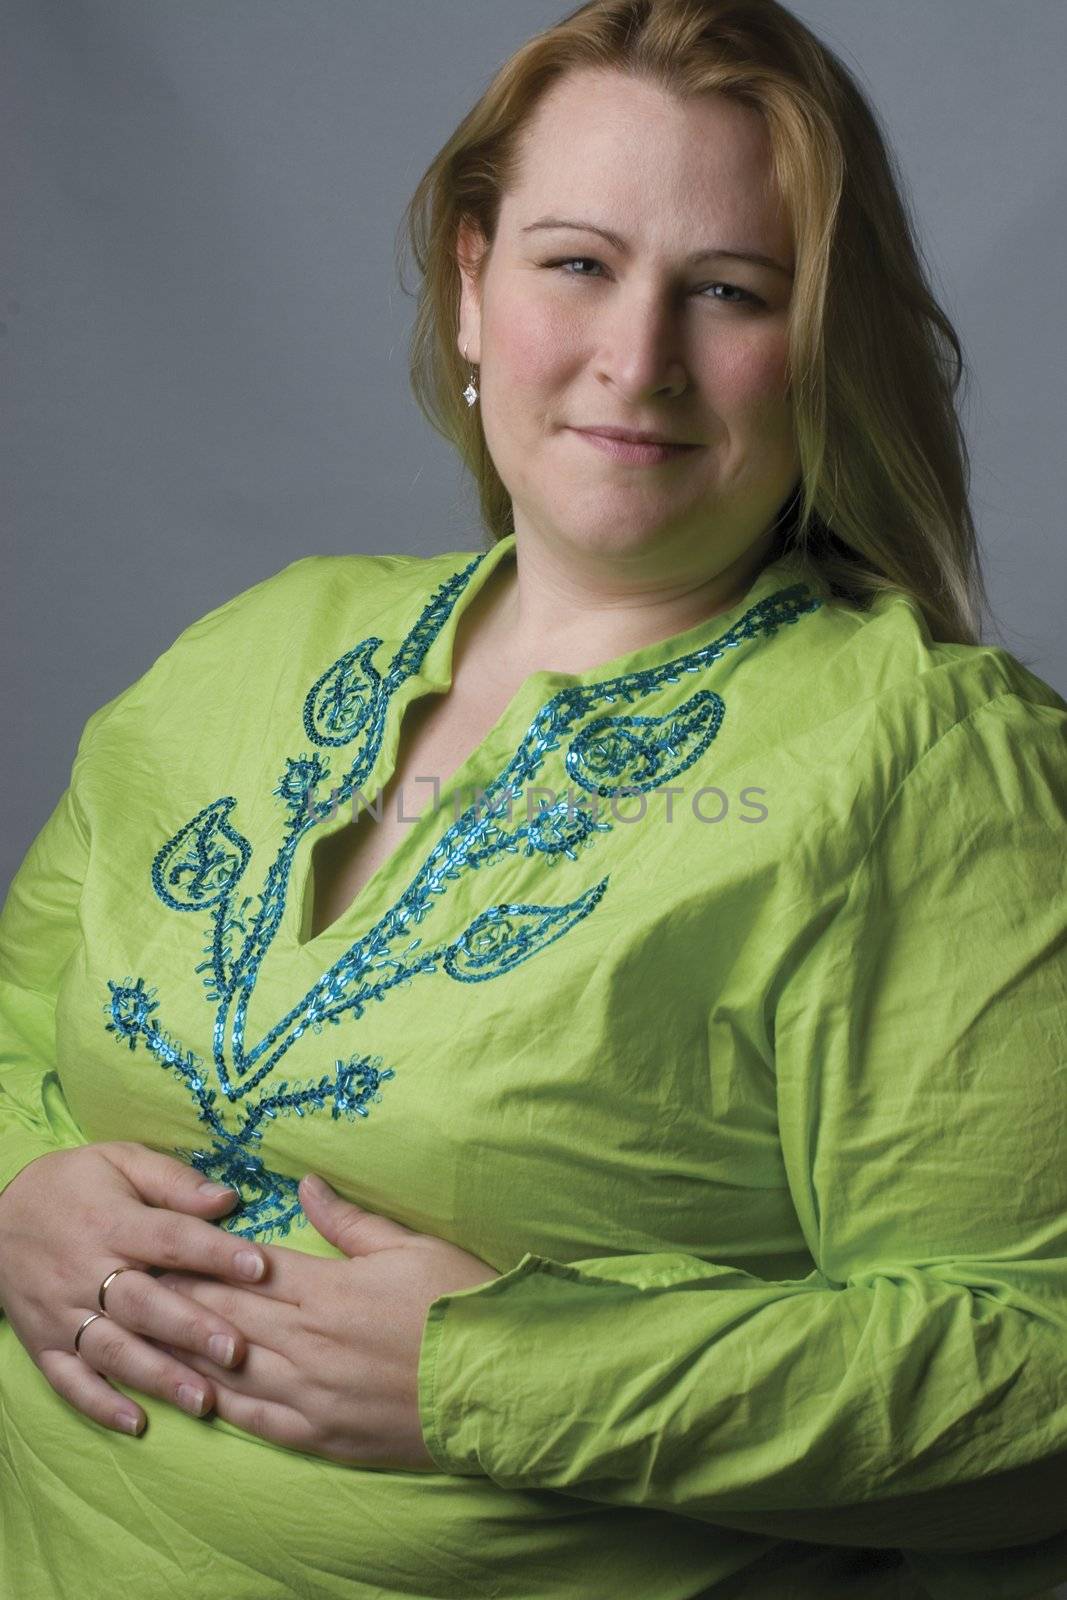 Female model in her thirties, over weight, with green top